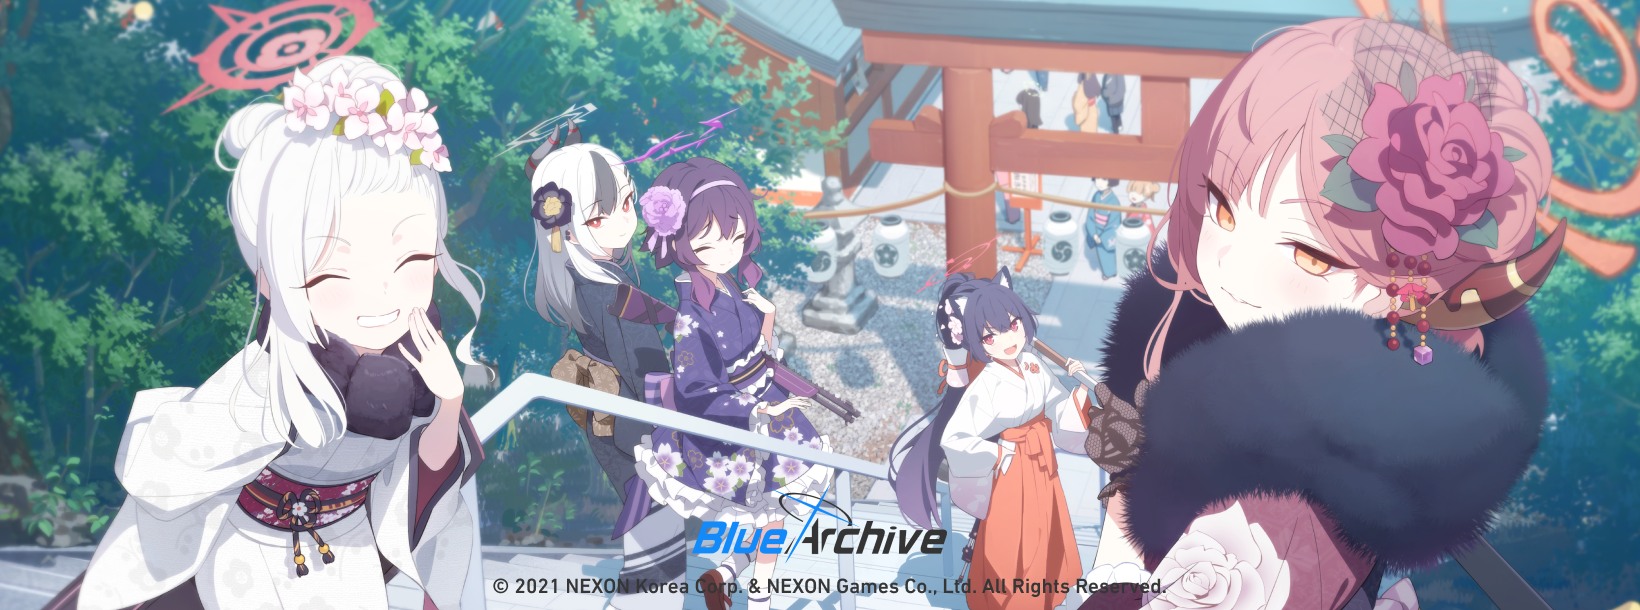 blue archive 2nd anniversary